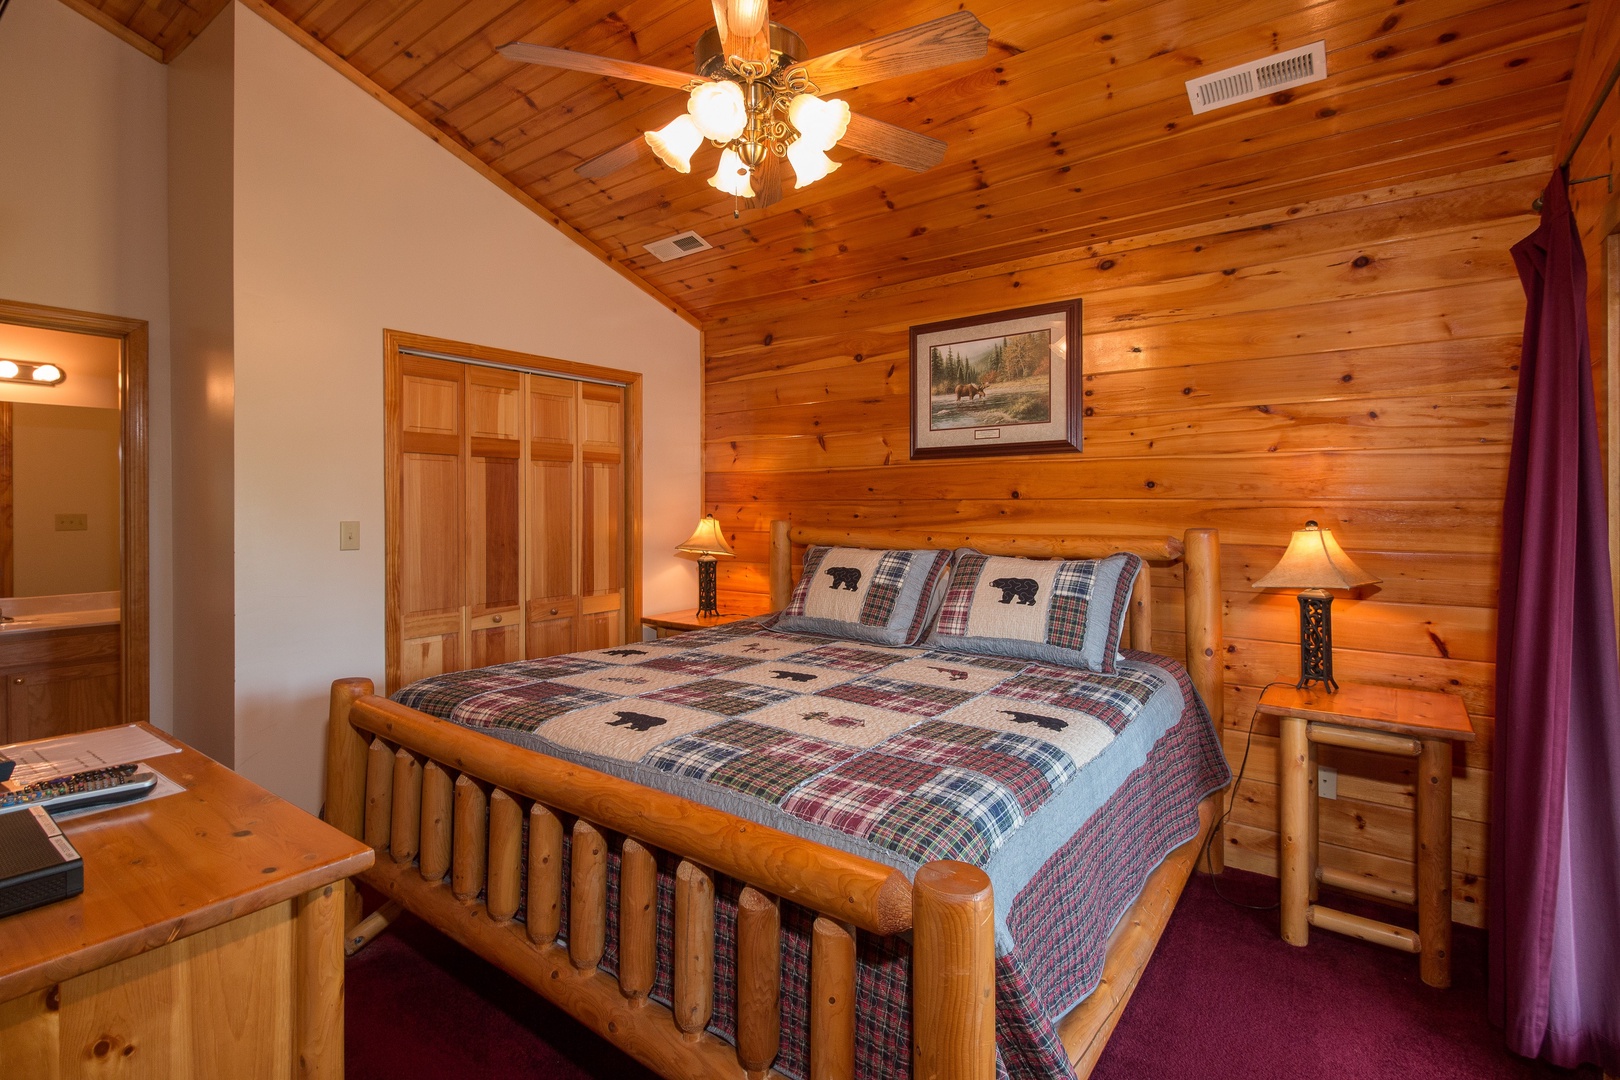 Bedroom with a king log bed, night stands, and lamps at Moose Lodge, a 4 bedroom cabin rental located in Sevierville